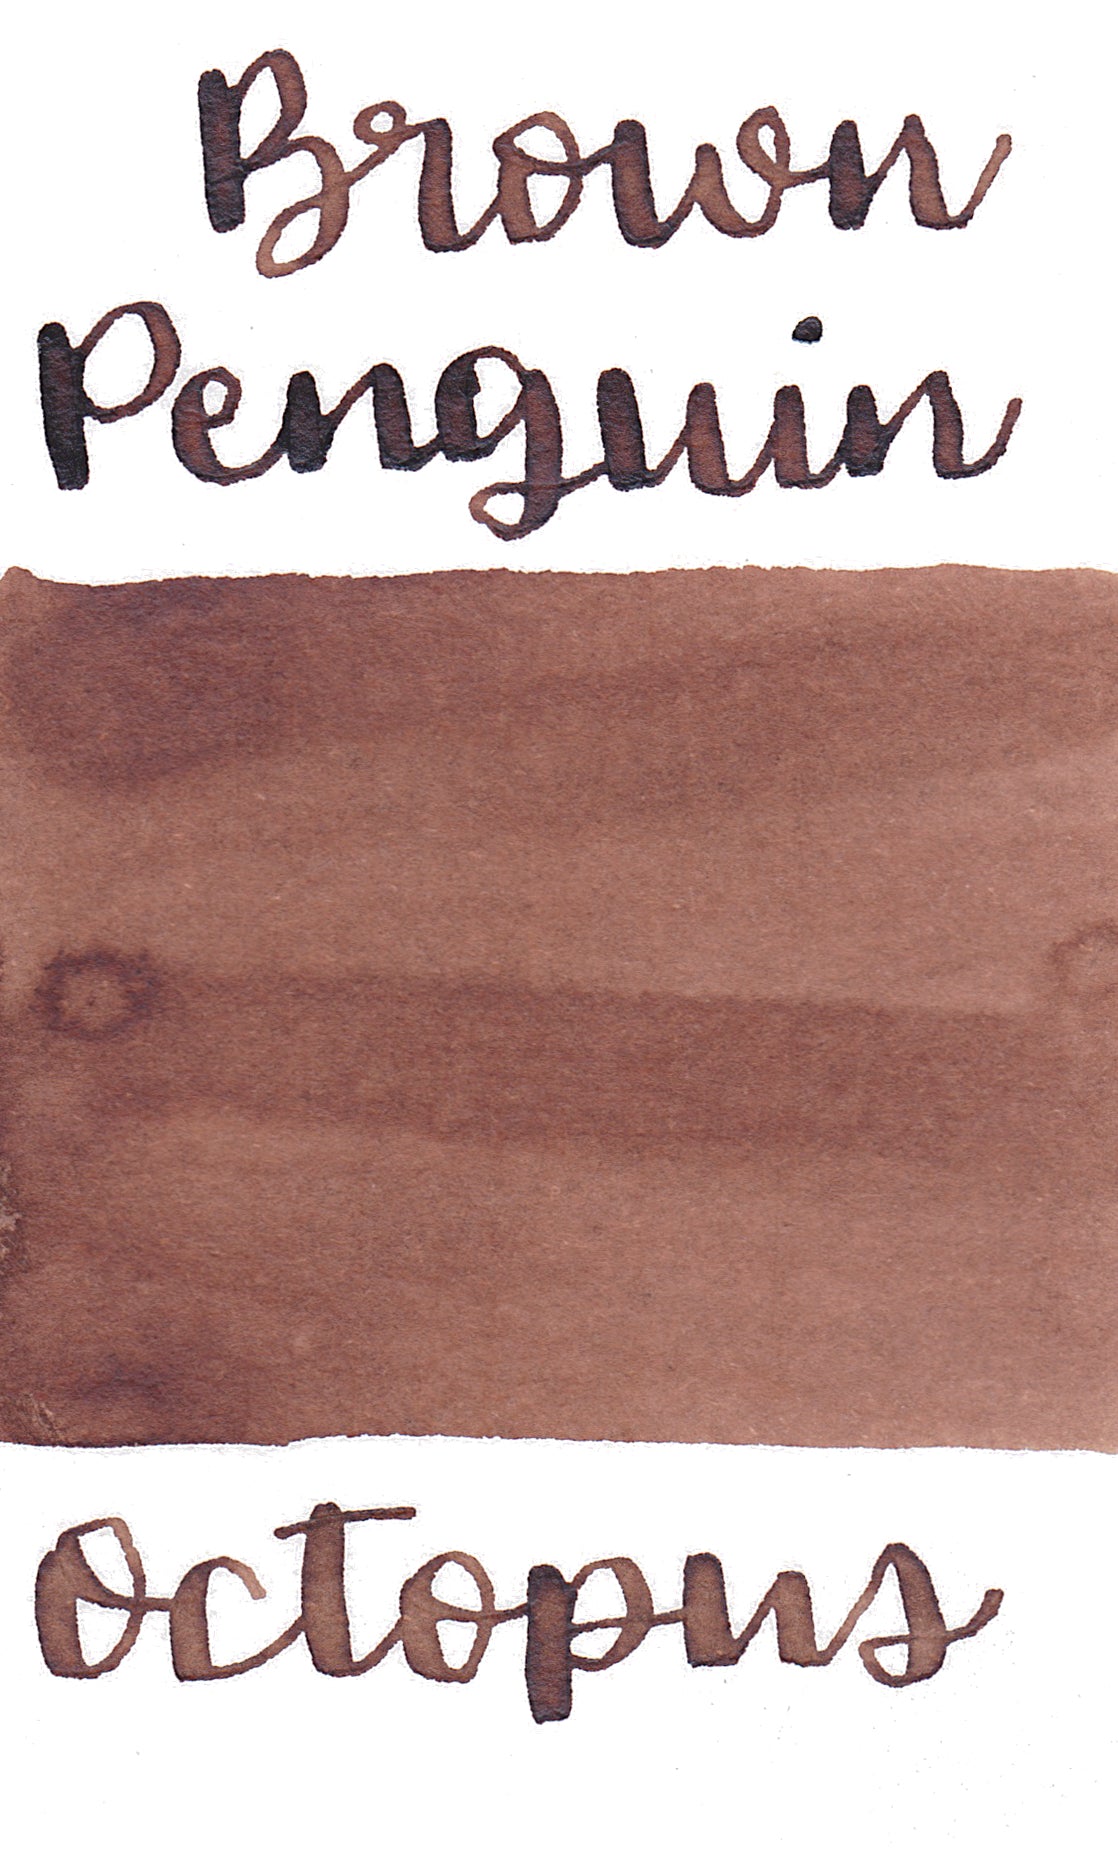 Octopus Write and Draw Ink 431 Brown Penguin